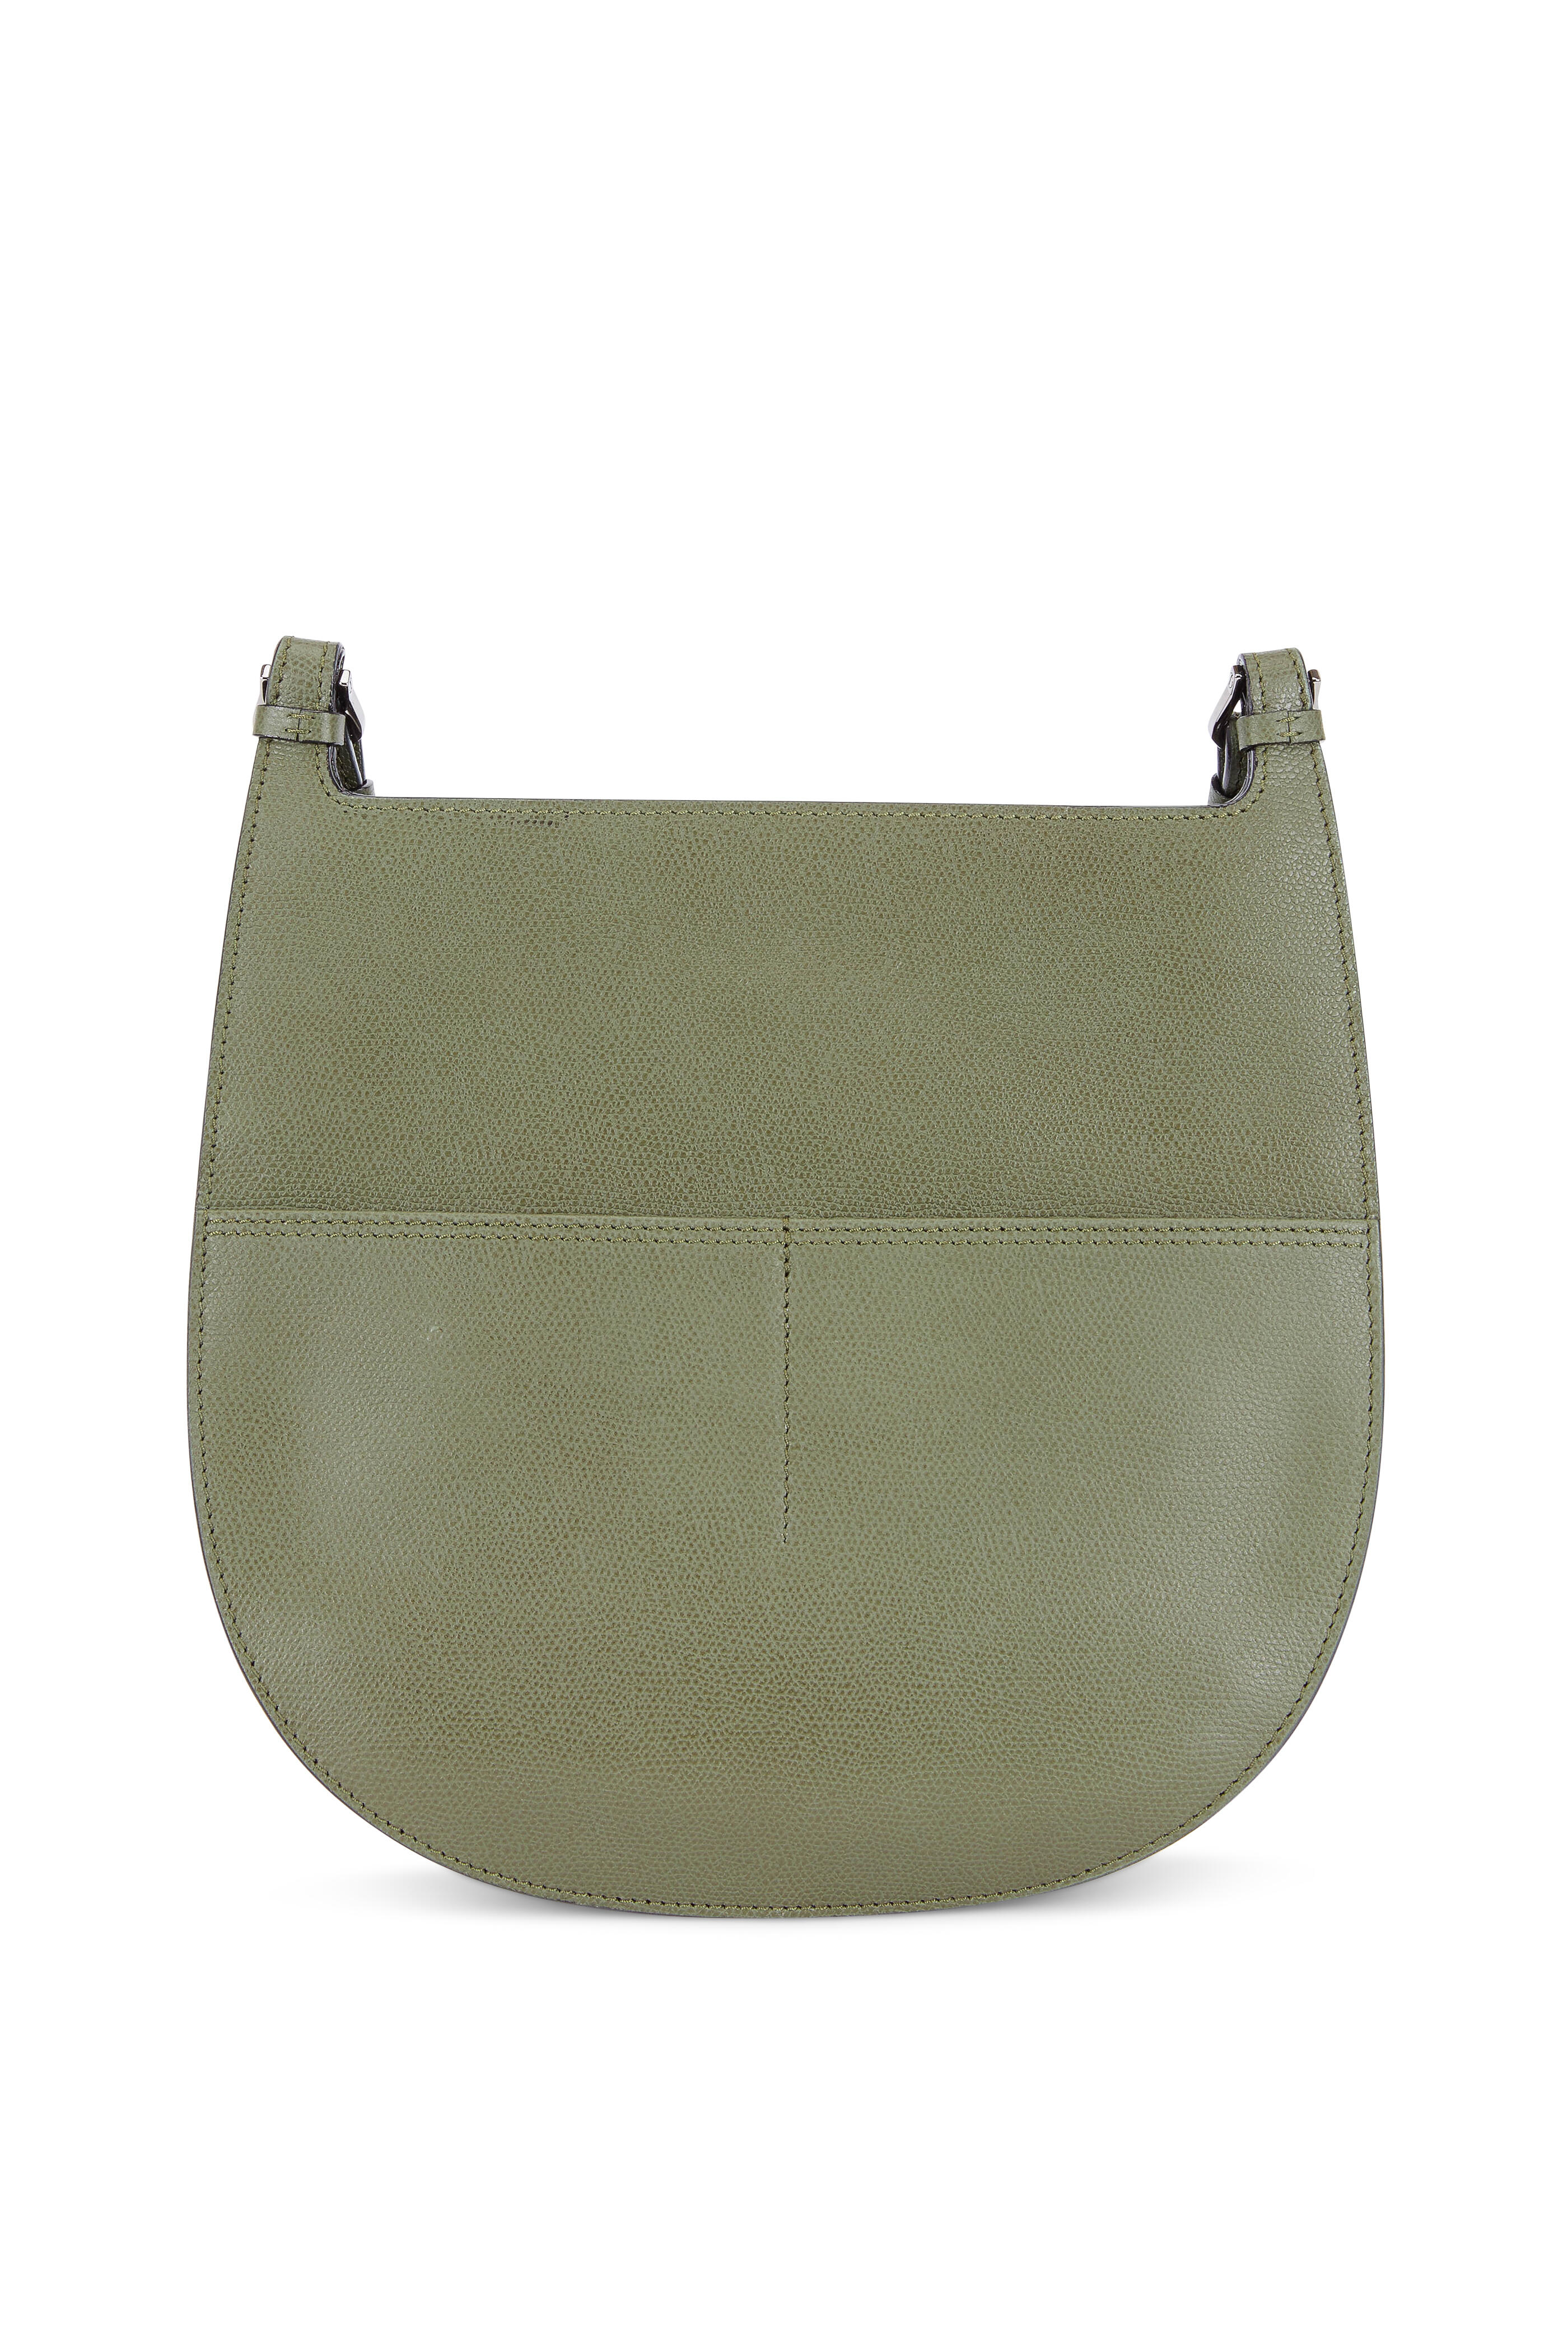 Loewe Women's Luna Avocado Leather Small Shoulder Bag | by Mitchell Stores